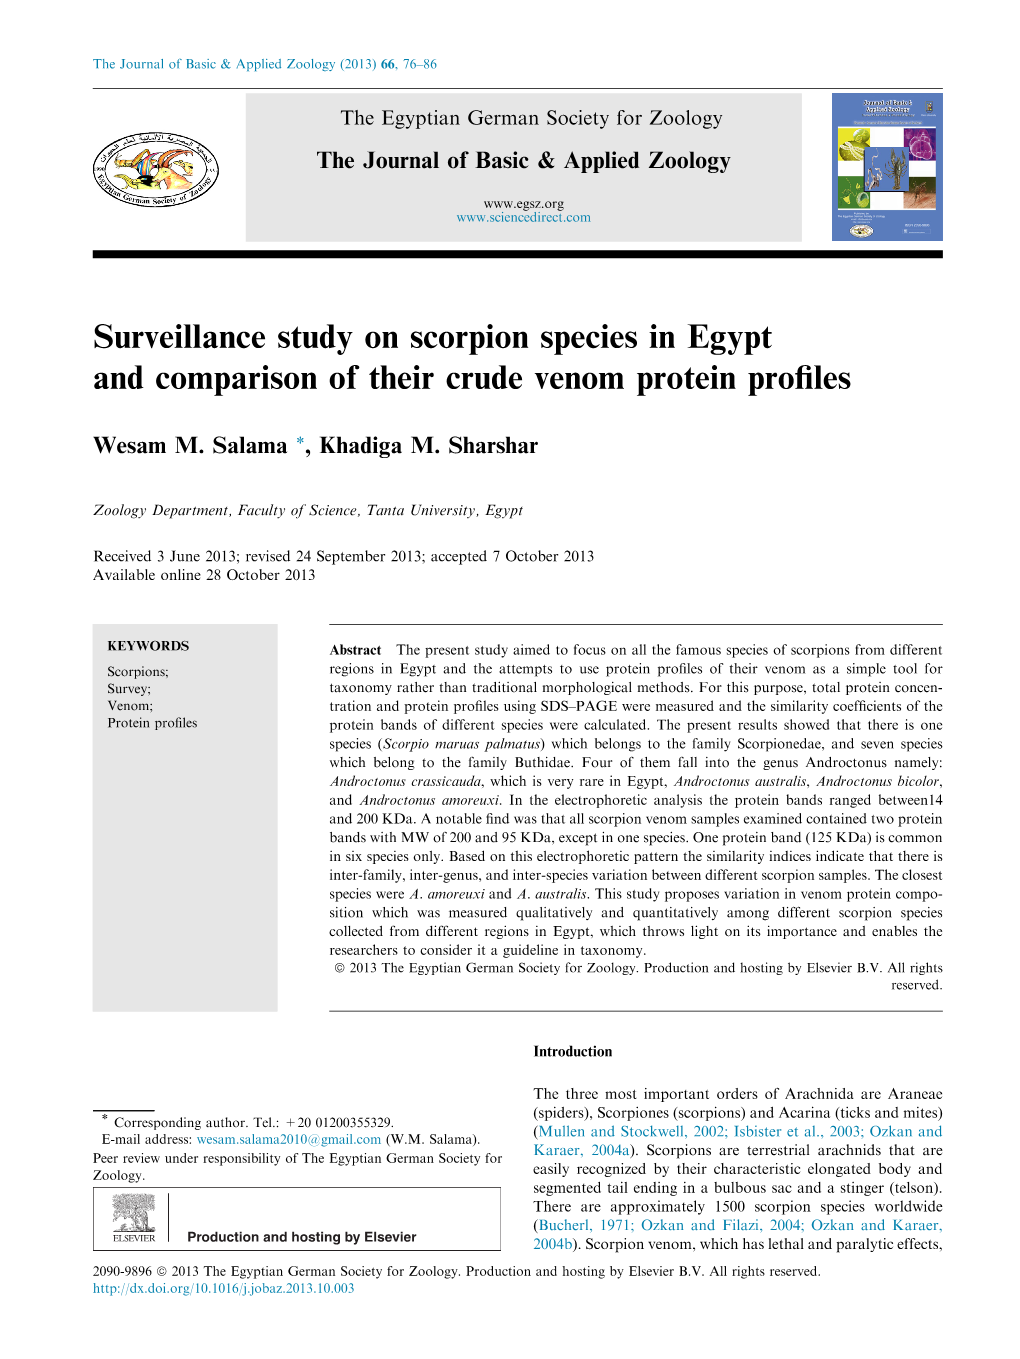 Surveillance Study on Scorpion Species in Egypt and Comparison of Their Crude Venom Protein Proﬁles